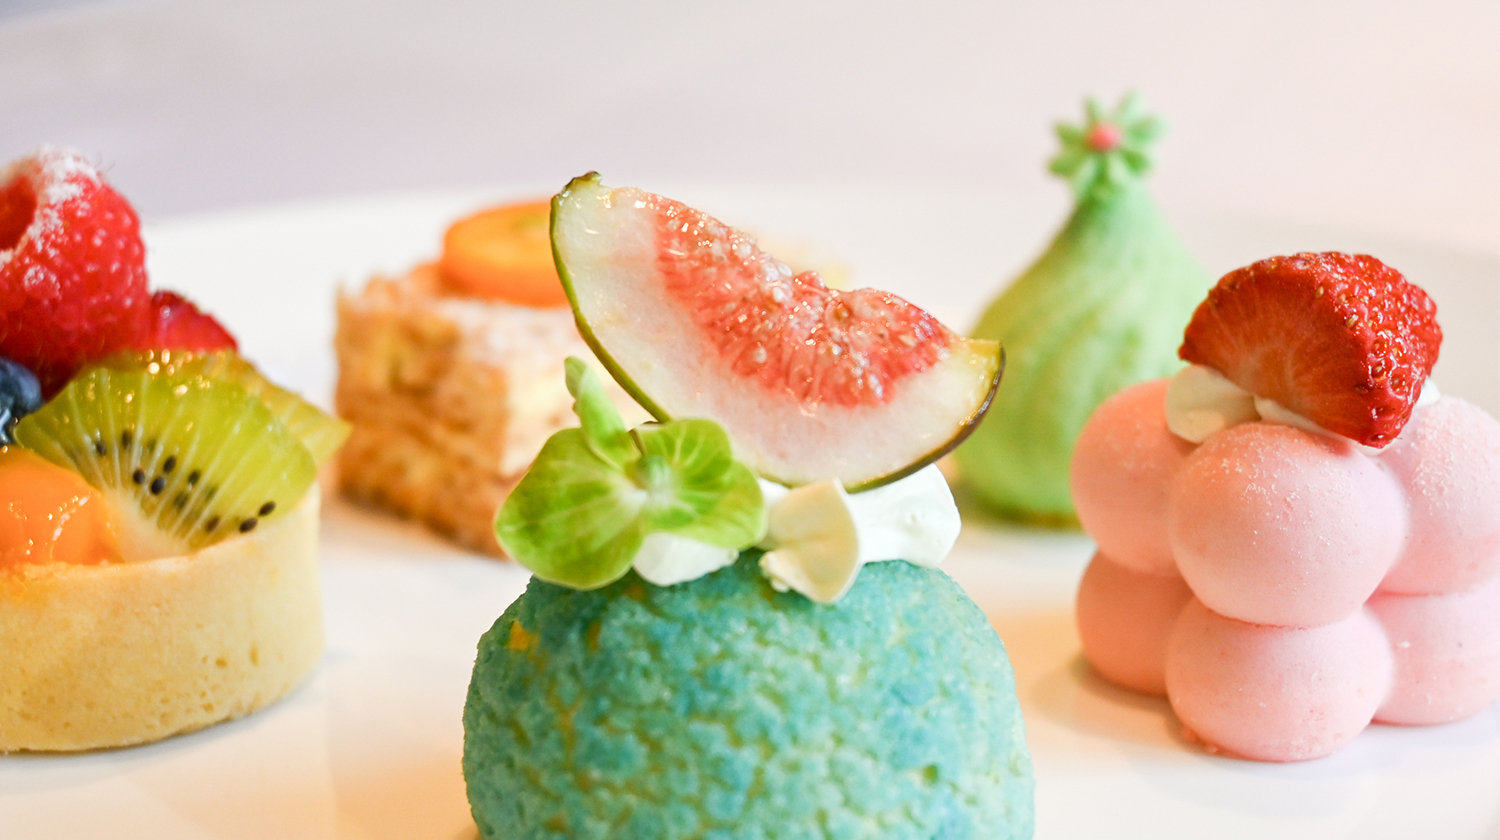 Colourful and fruity desserts for a wonderful springtime treat!